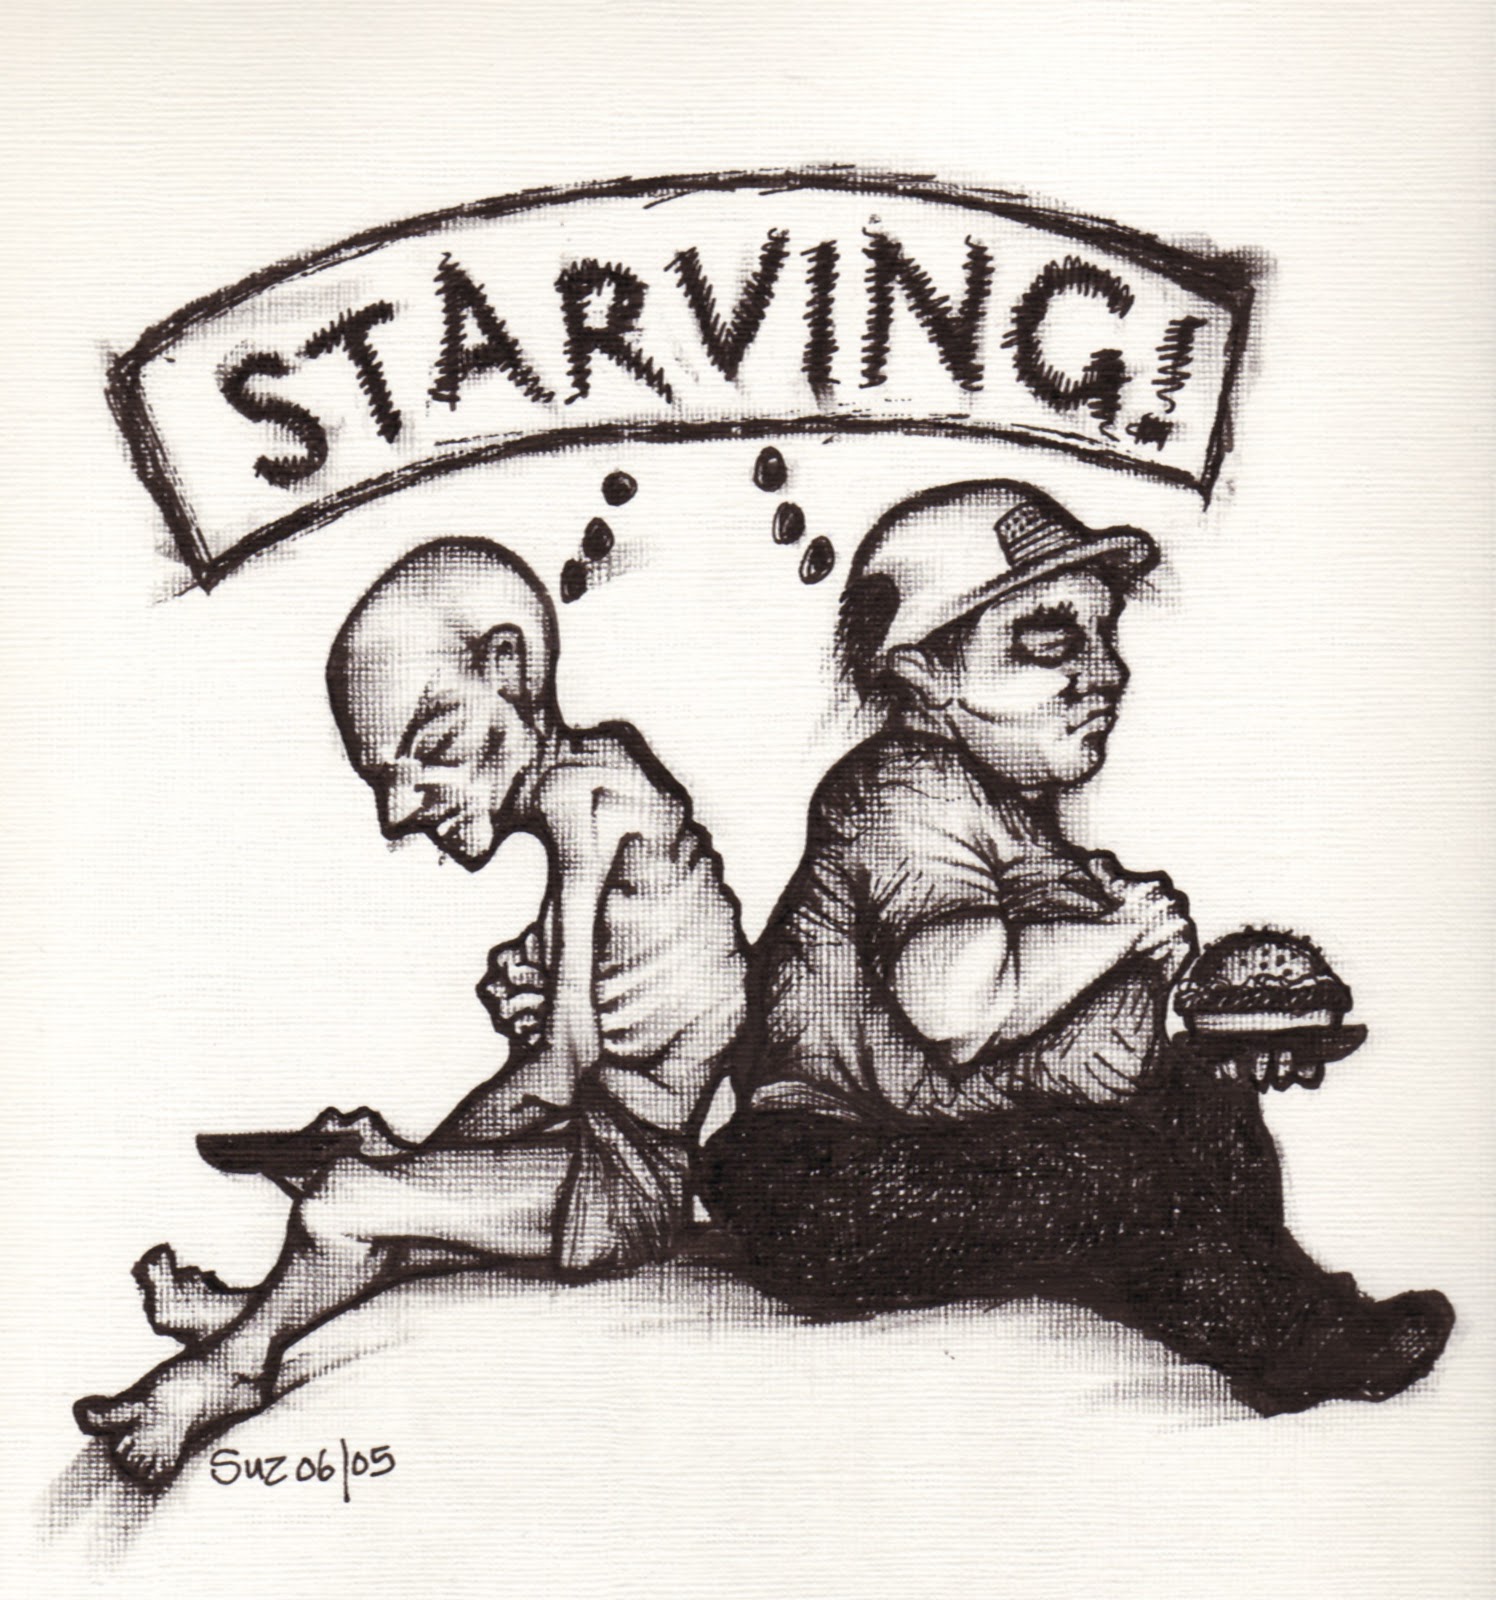 Starving help